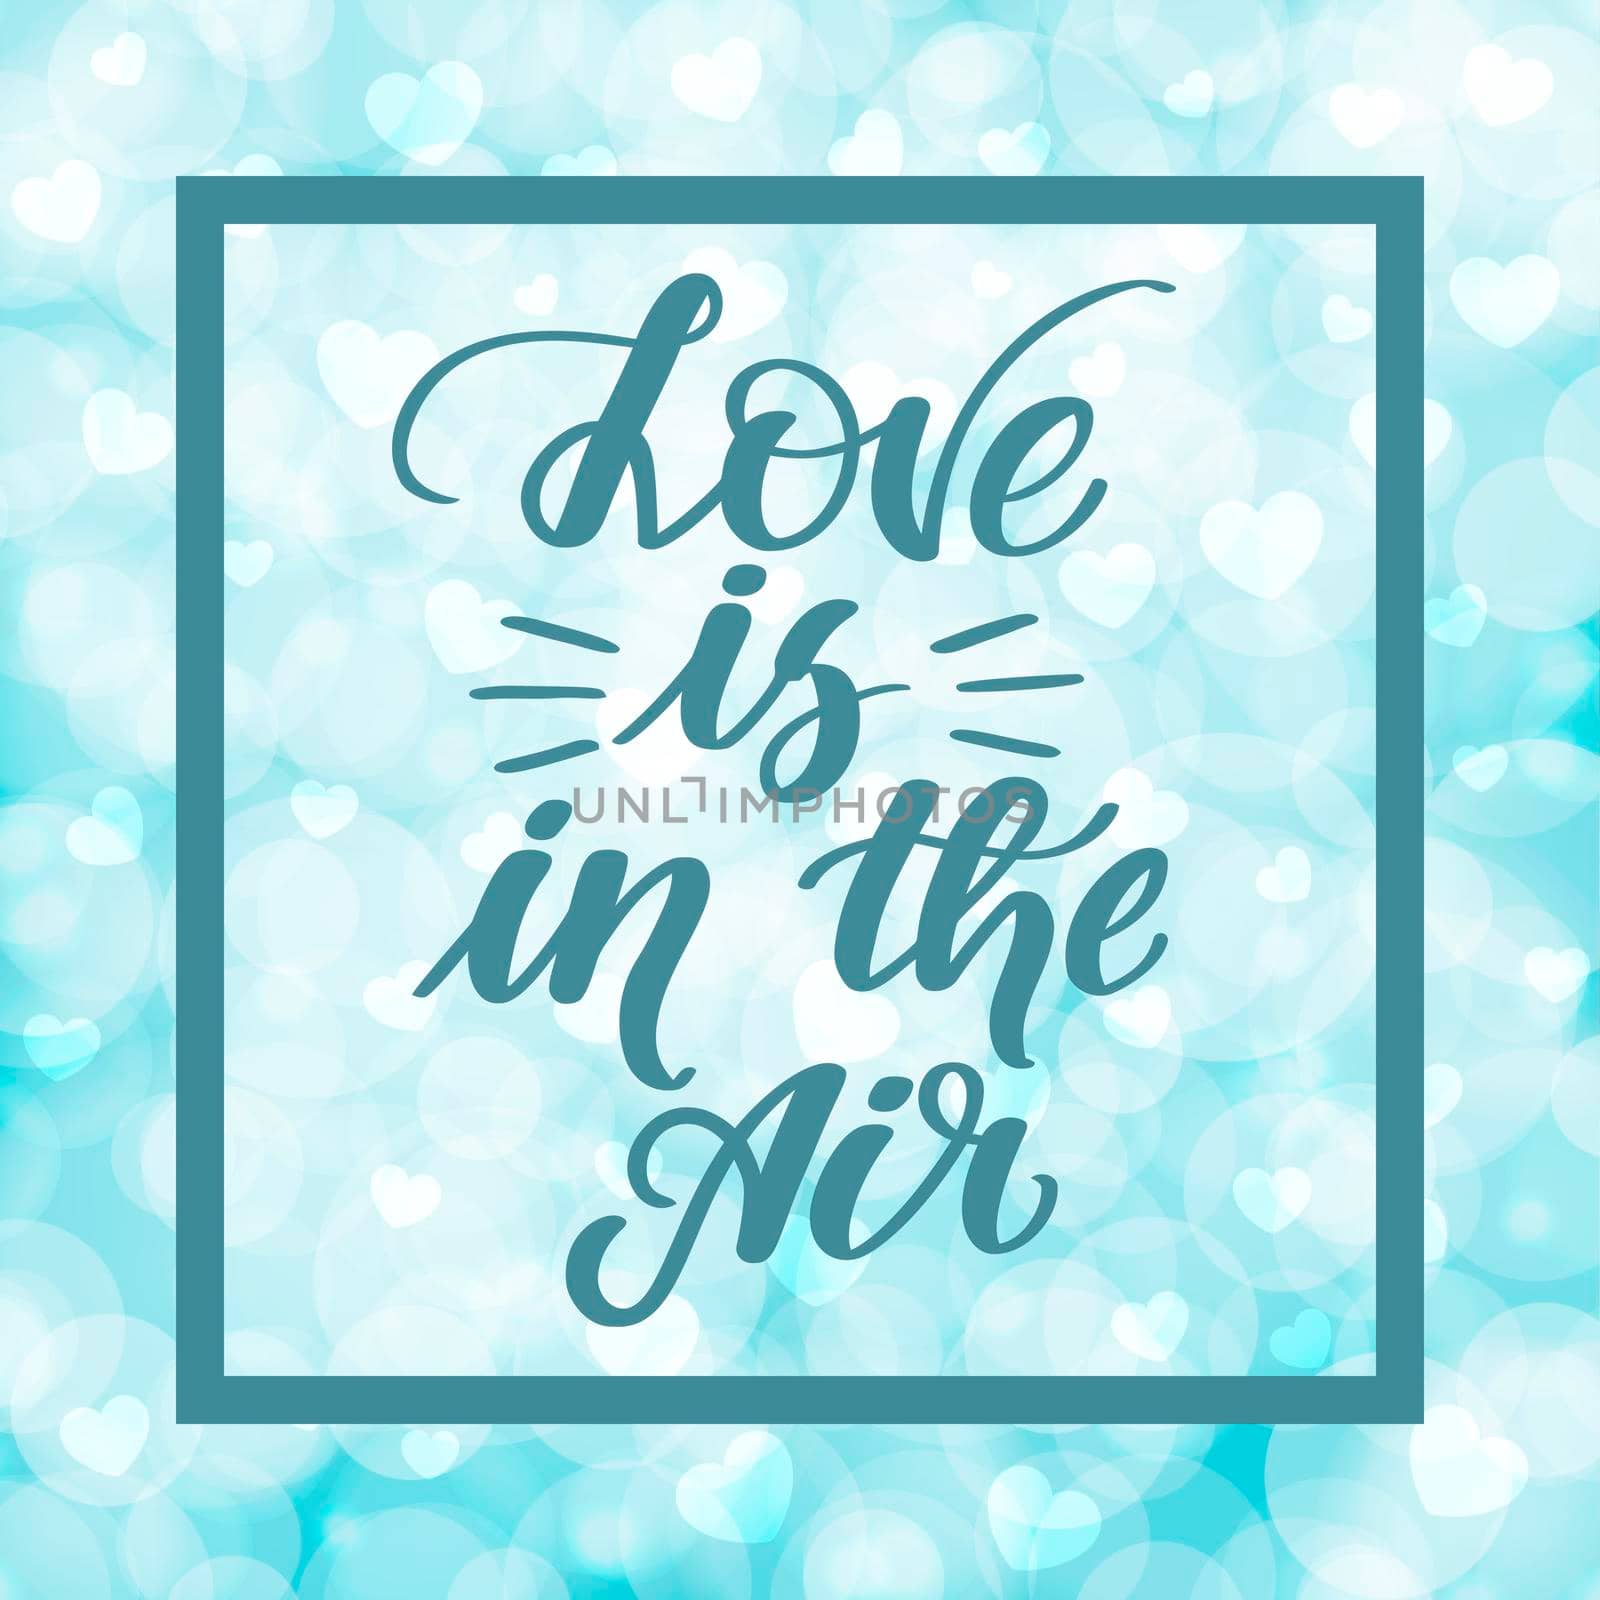 Love is in the air. Handwritten lettering on blurred bokeh background with hearts. illustration for posters, cards and much more.